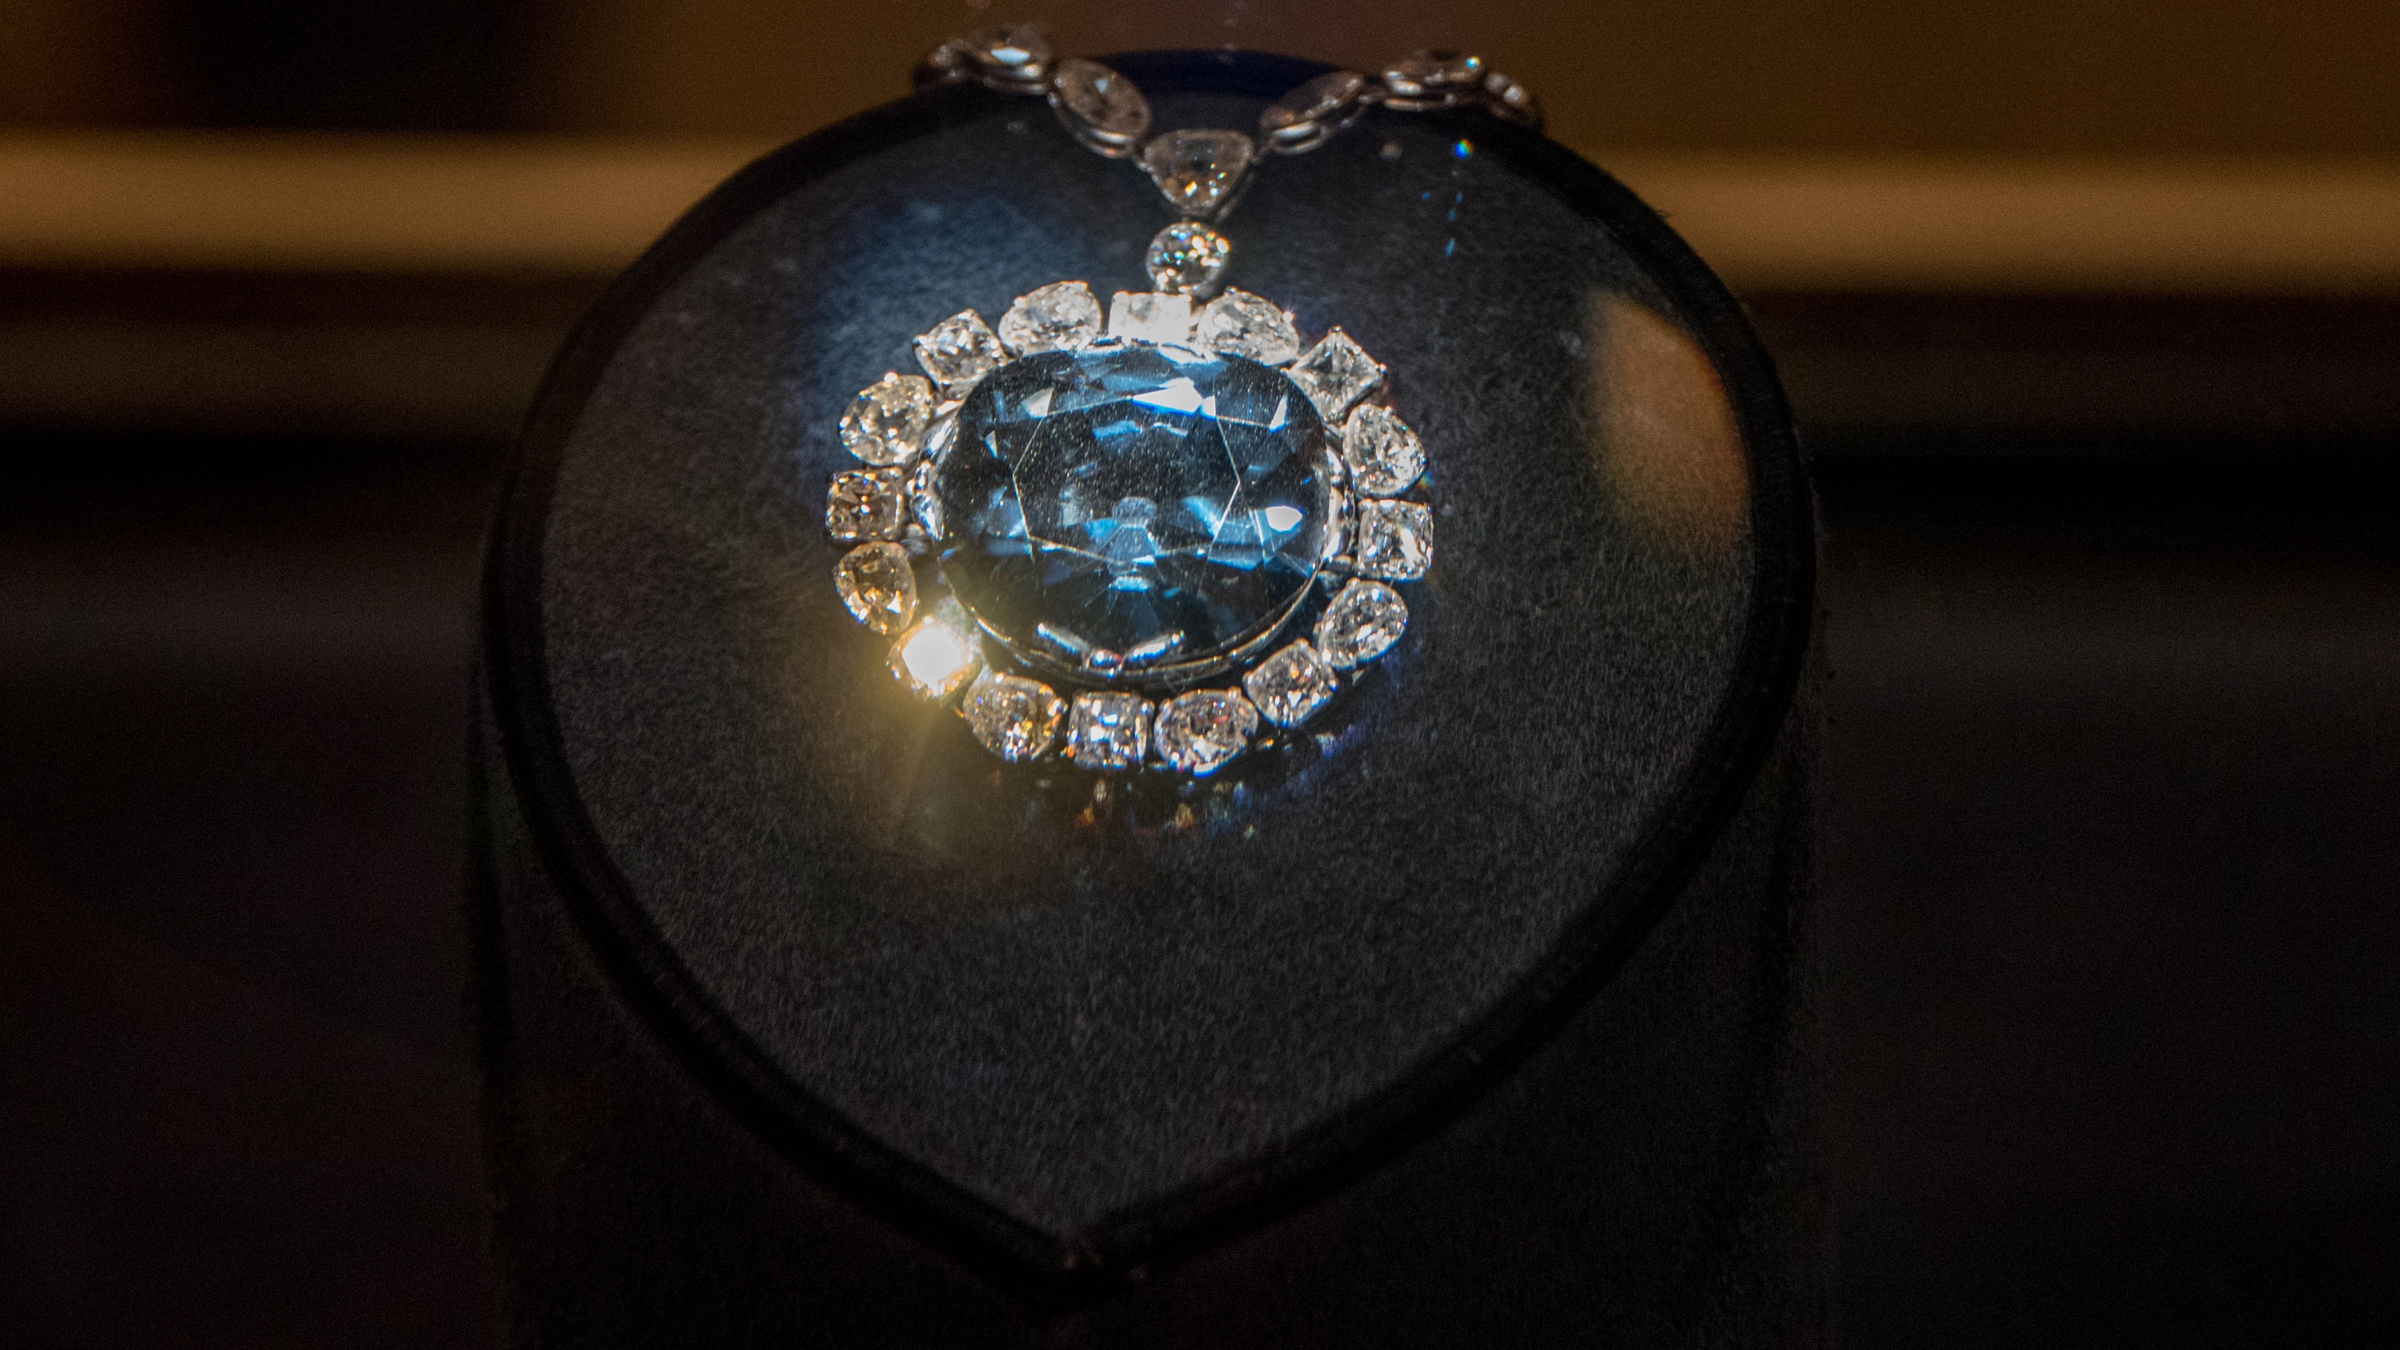  Scientists may have pinpointed the true origin of the Hope Diamond and other pristine gemstones 